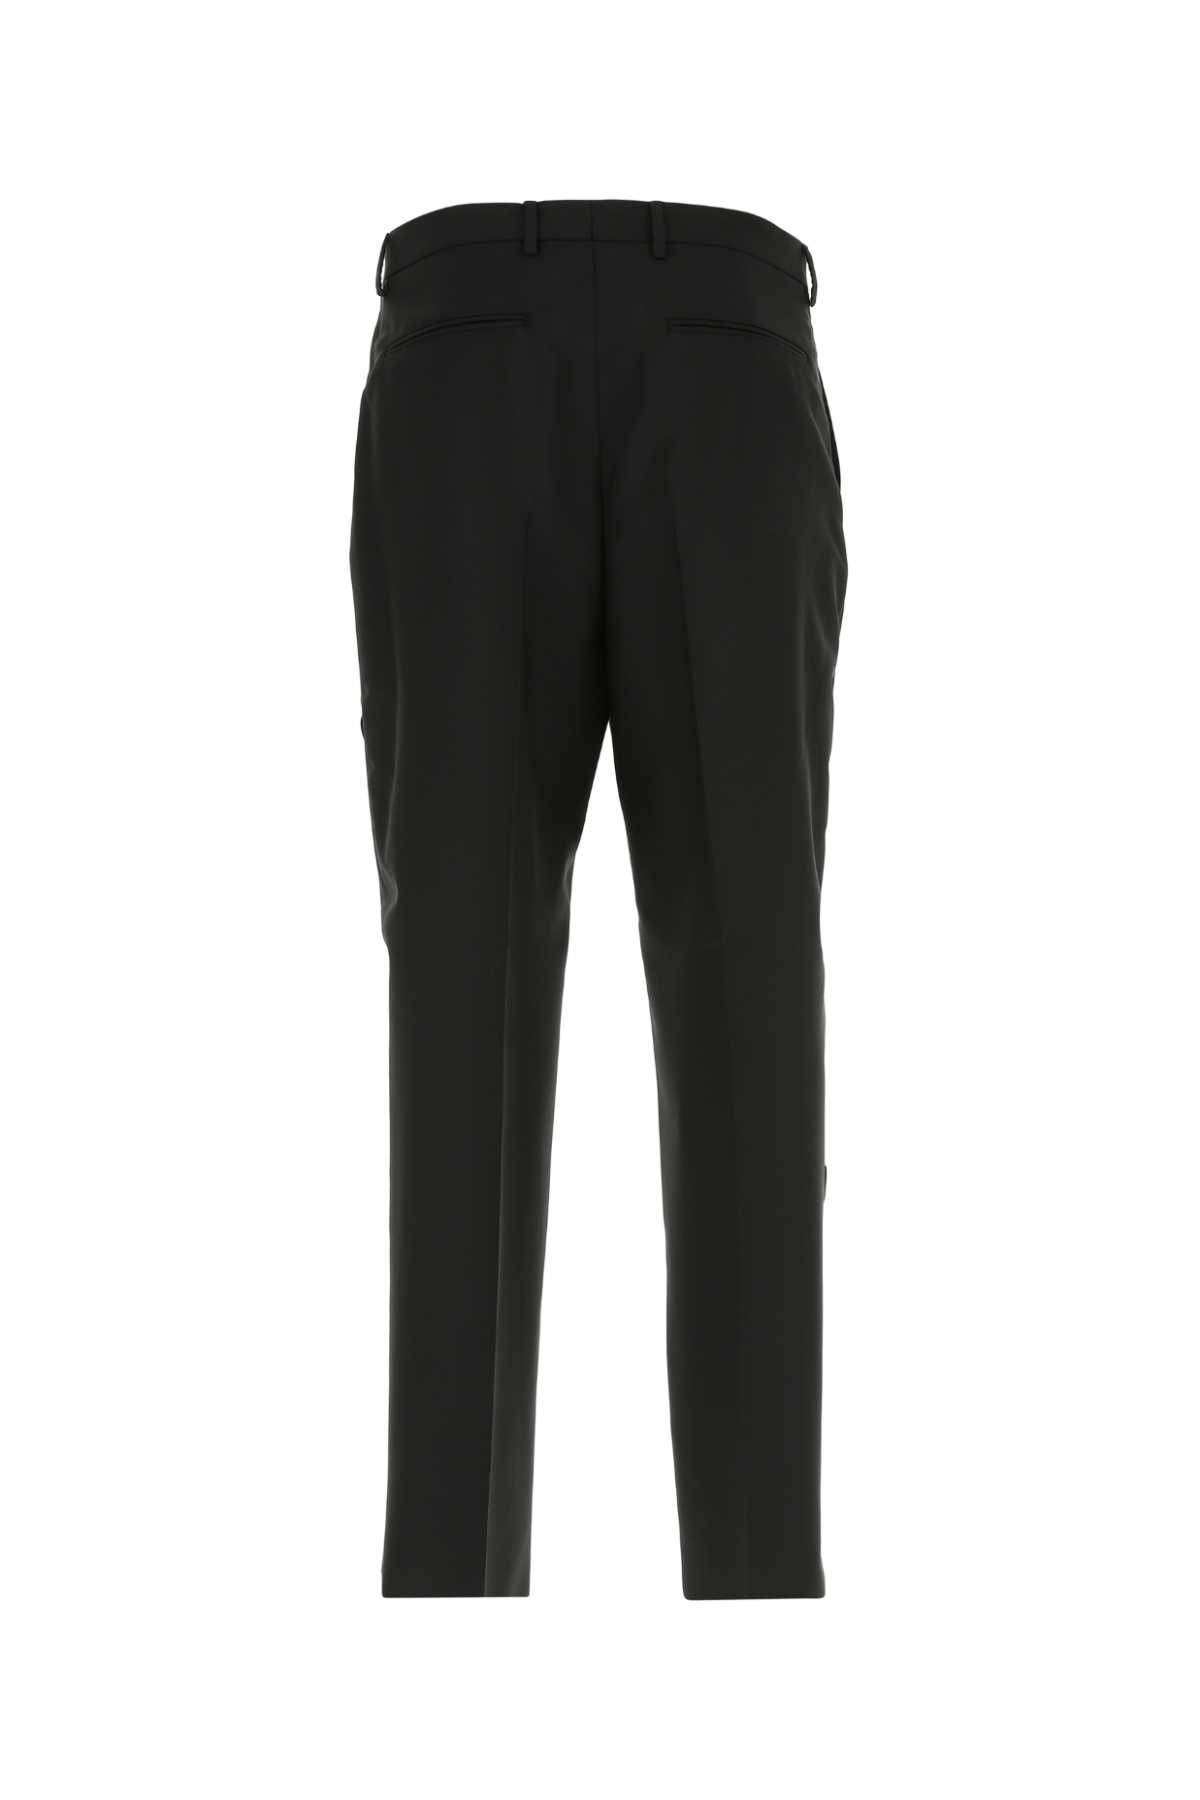 Shop Valentino Black Wool Blend Pant In 0no